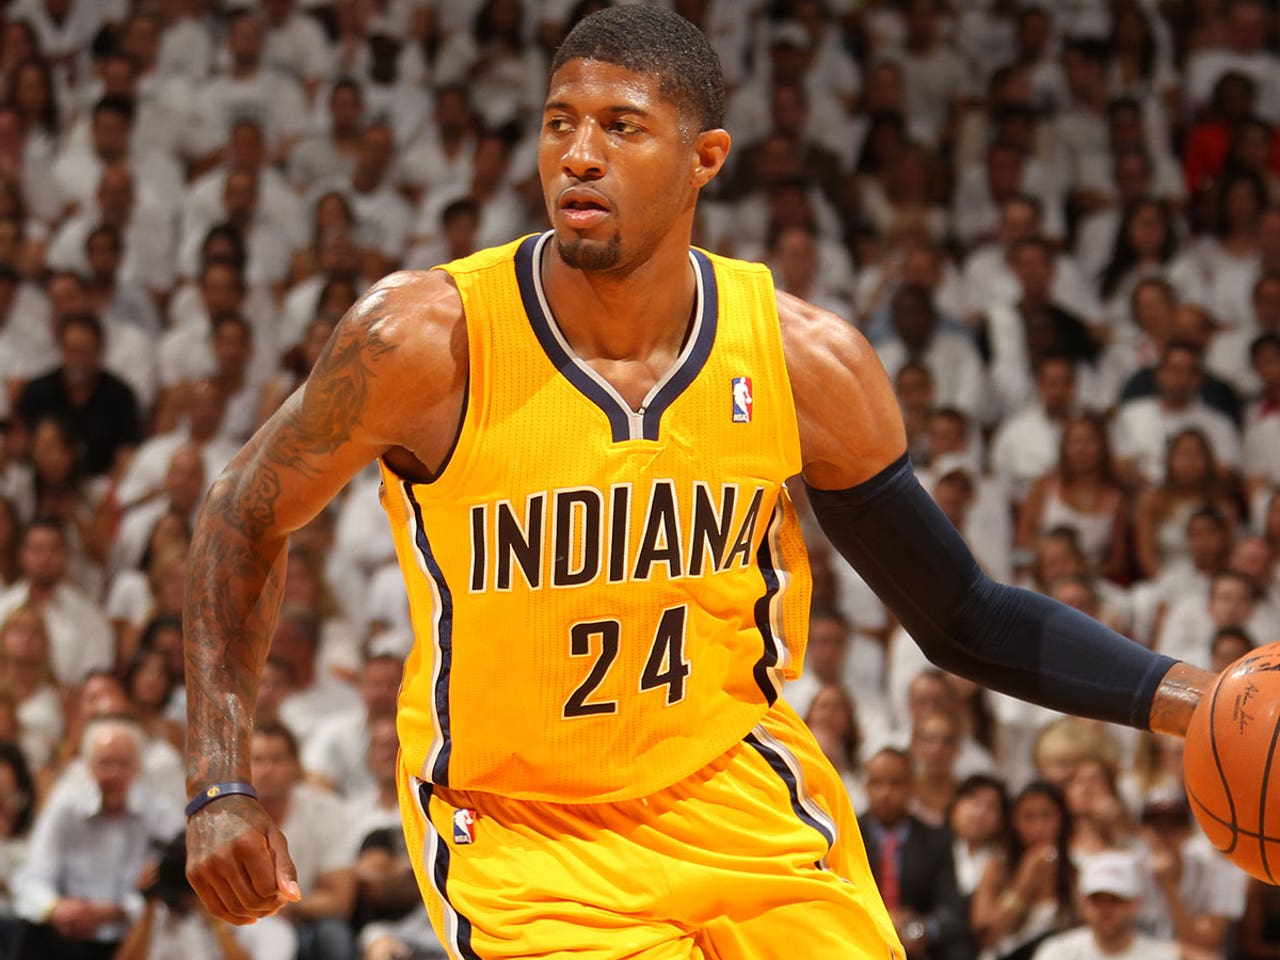 Paul George changes jersey number from 24 to 13, will be known as